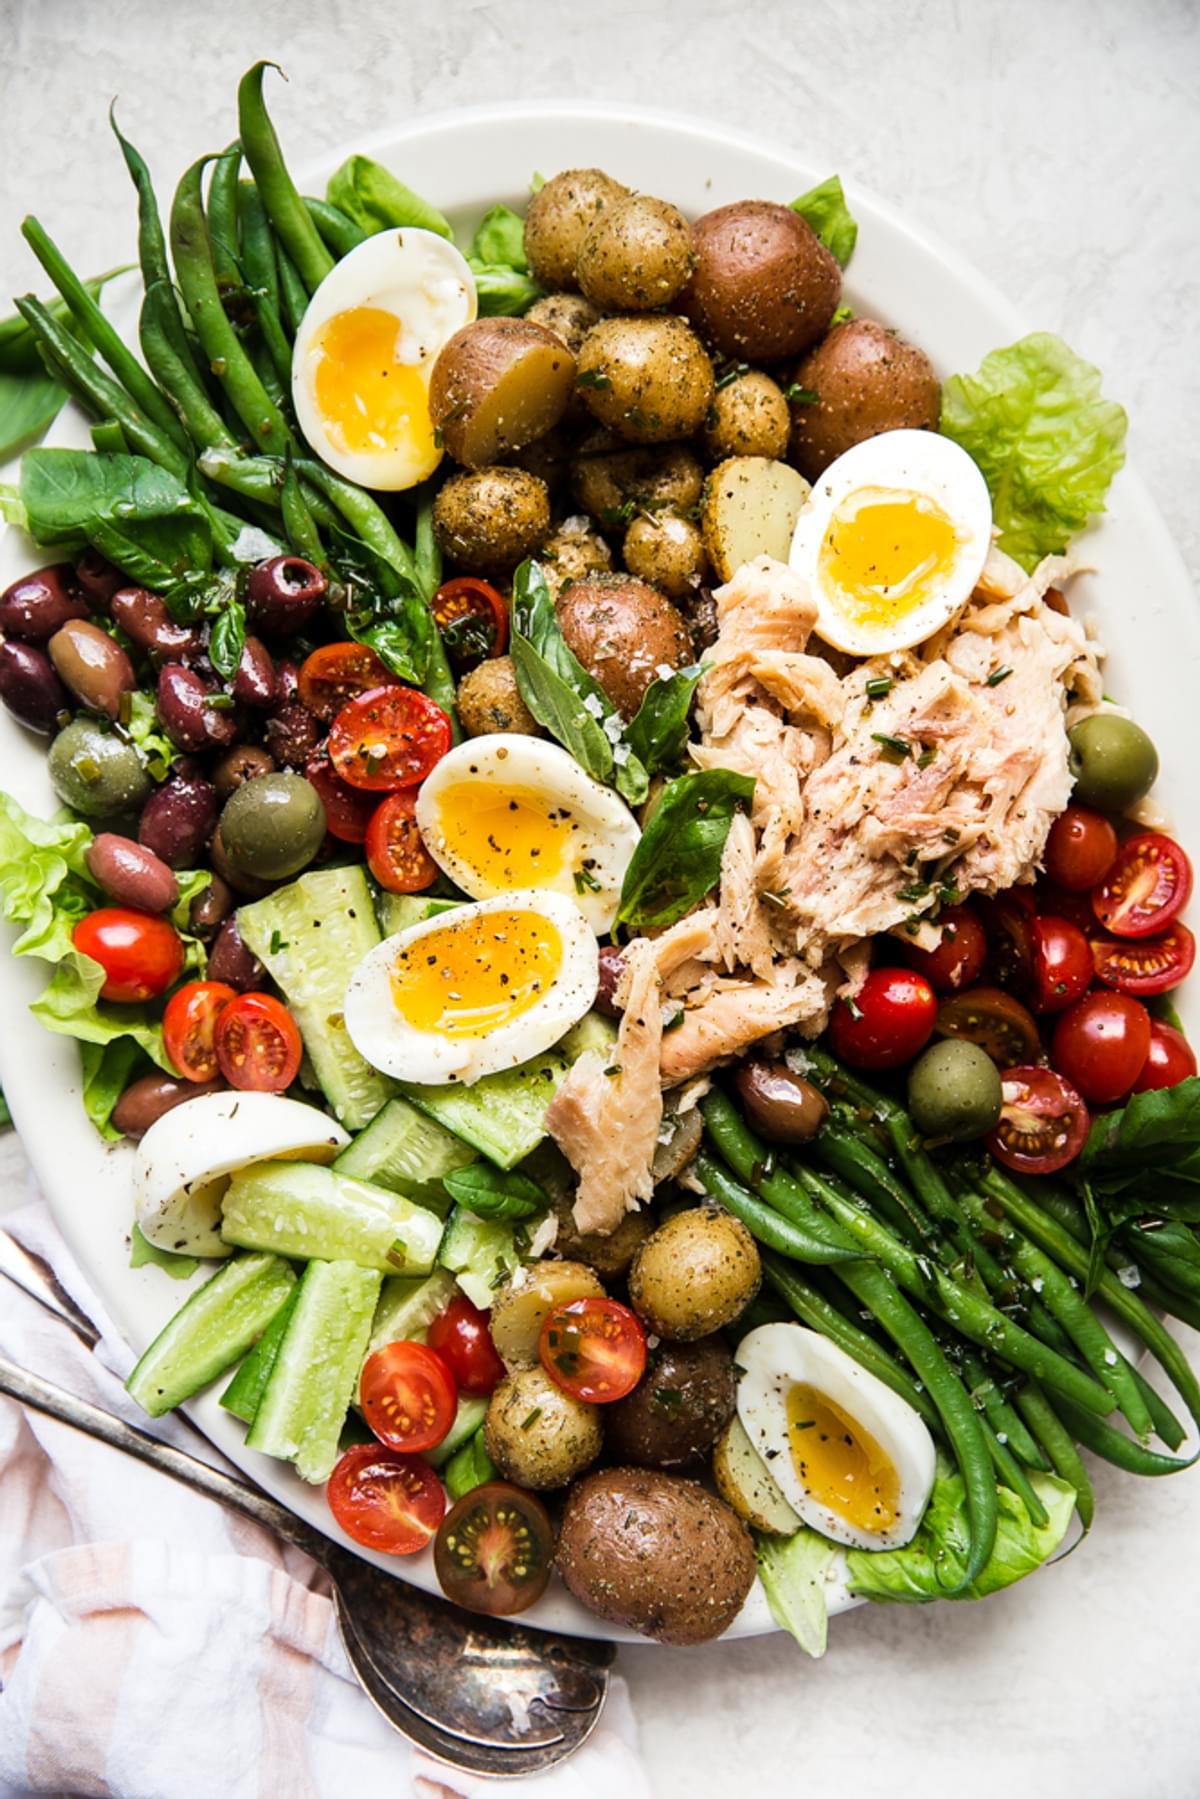 Easy Nicoise Salad made with eggs olives, and tomatoes